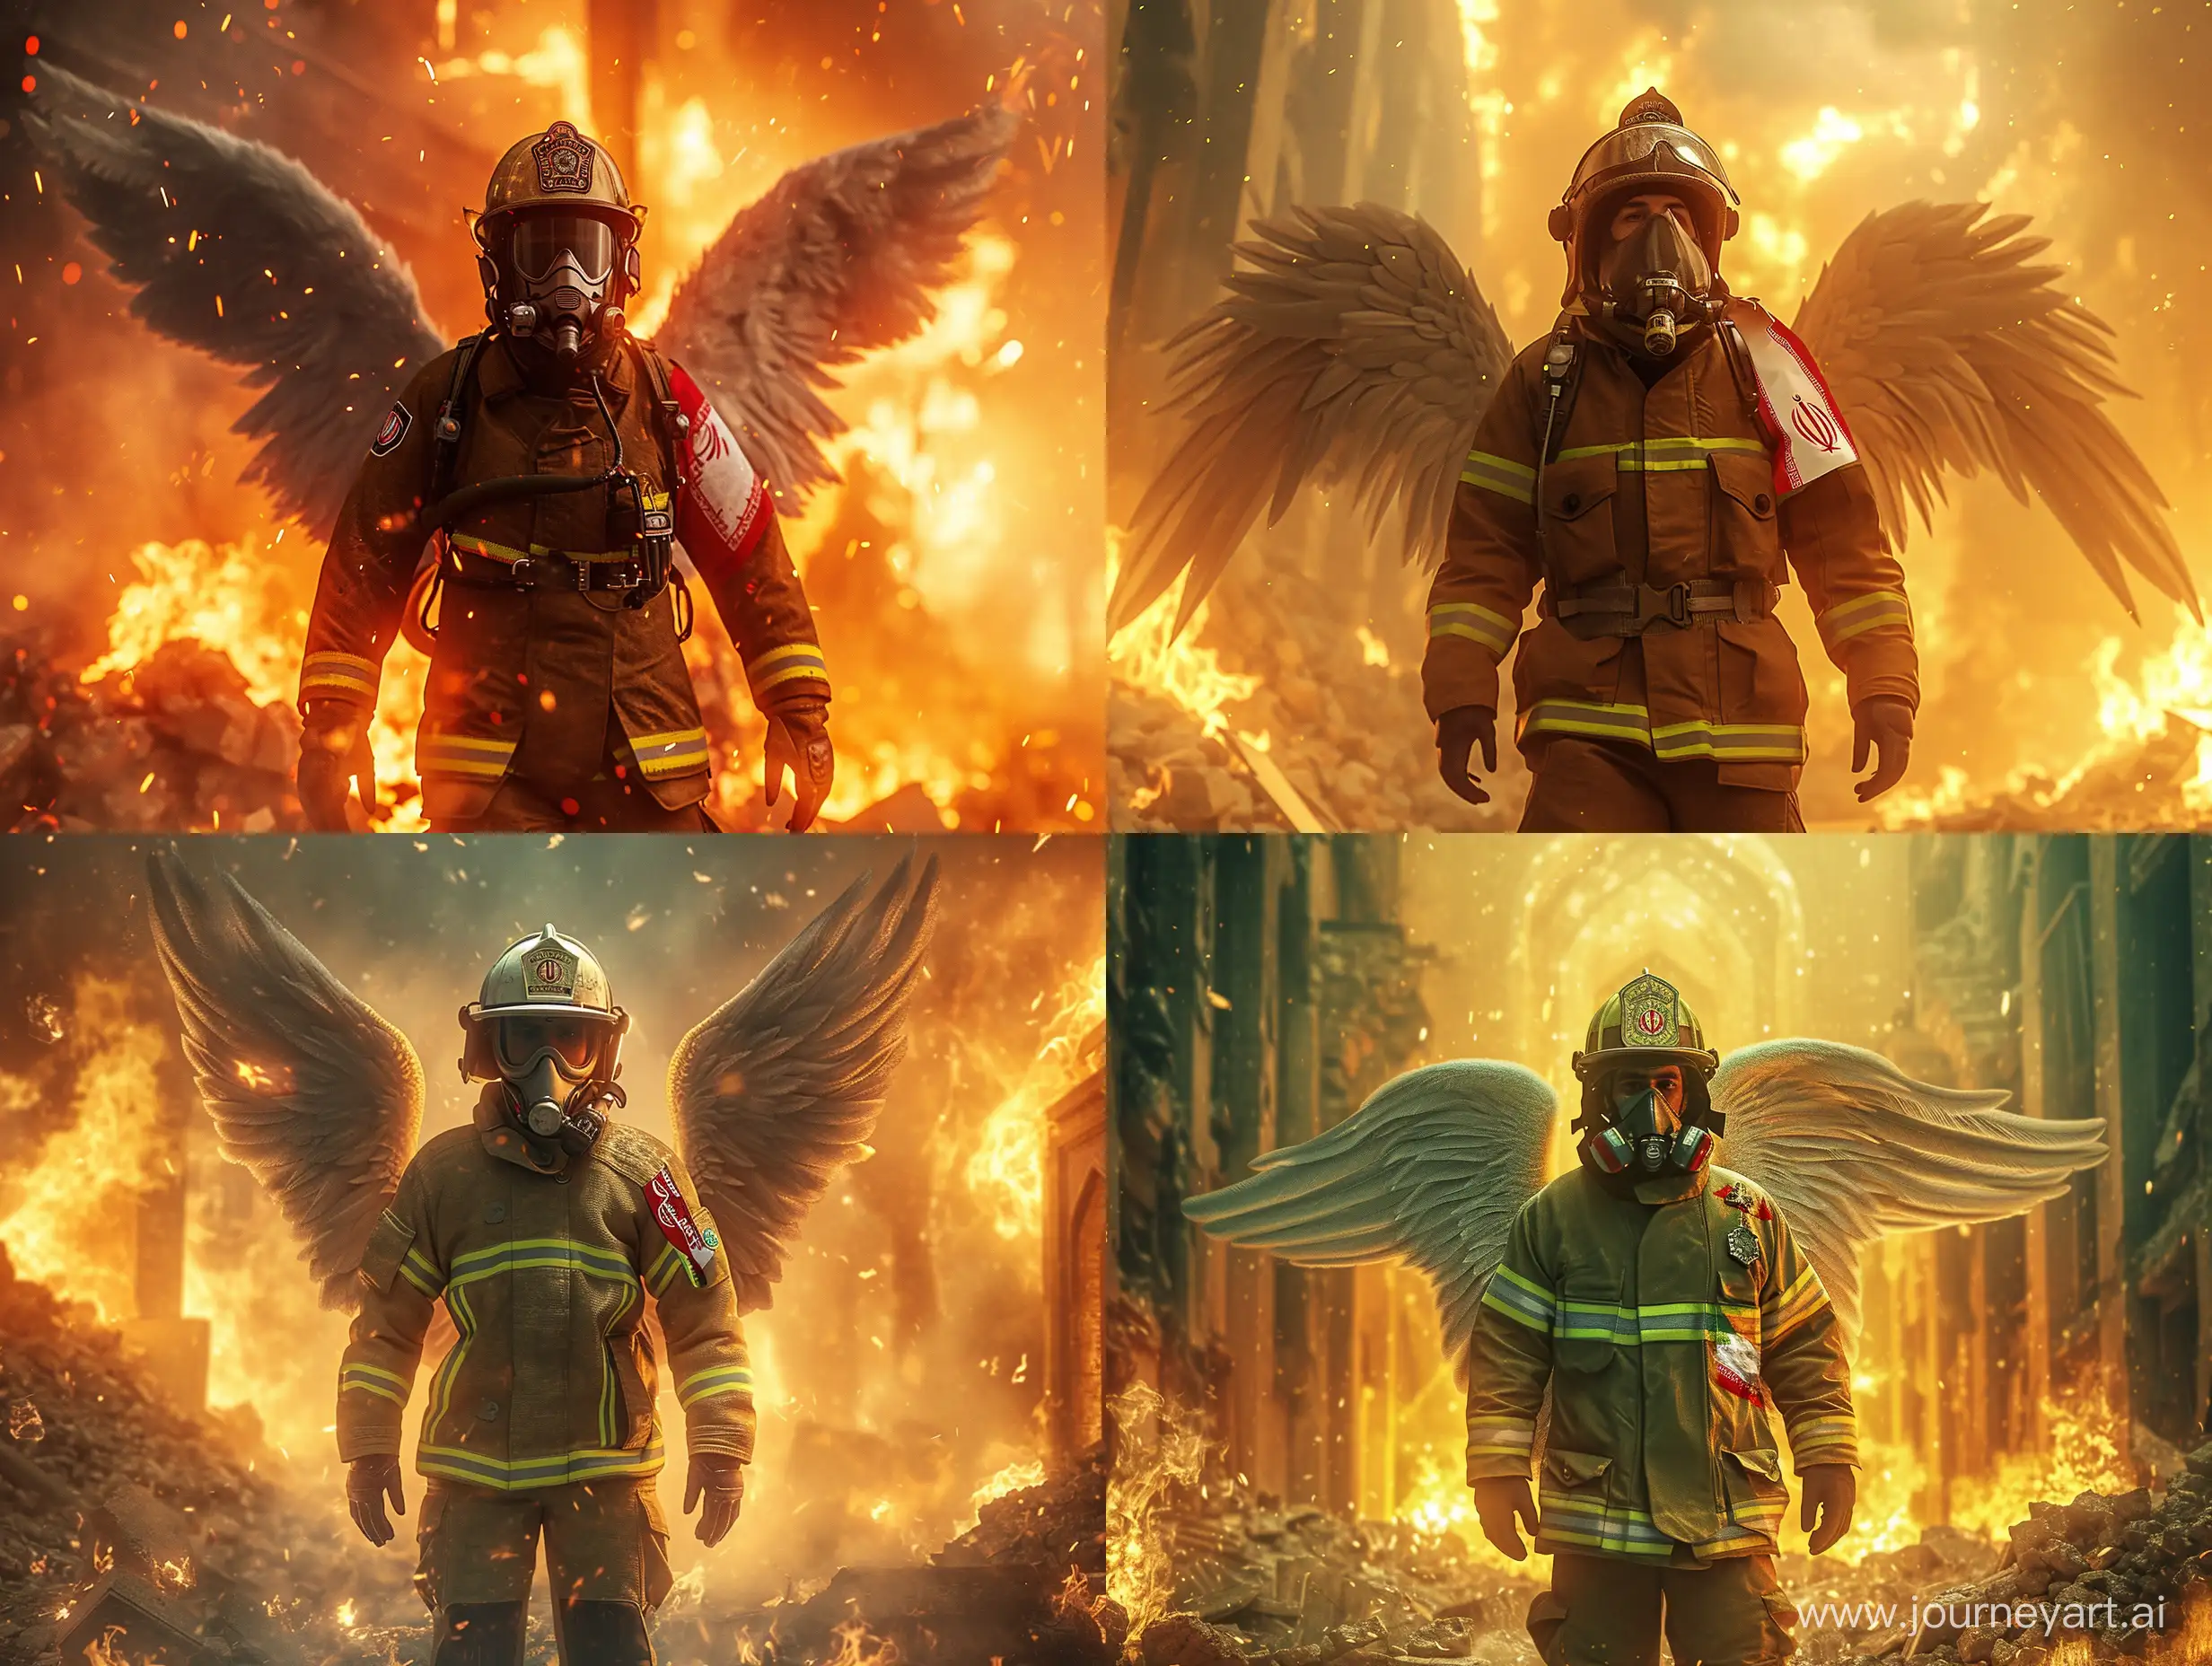 Heroic-Firefighter-with-Wings-Battling-a-Blaze-in-Cinematic-Realism